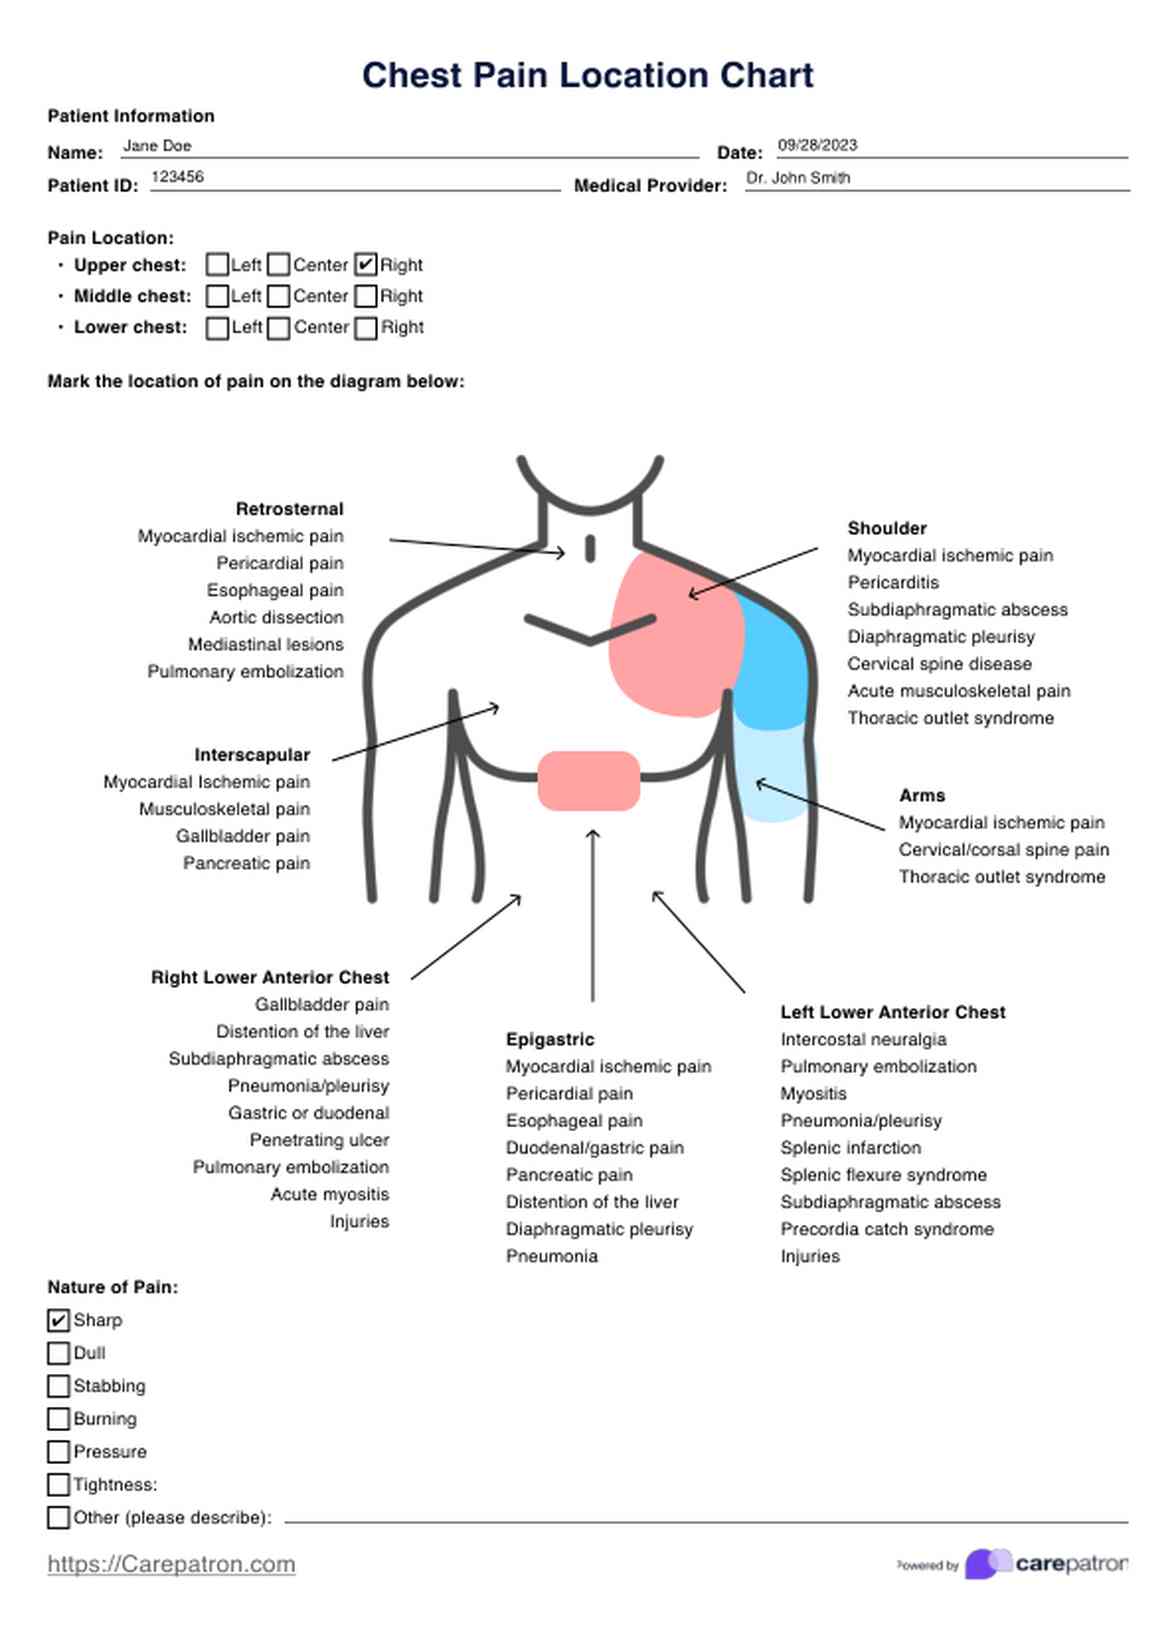 Chest Pain Location Charts PDF Example